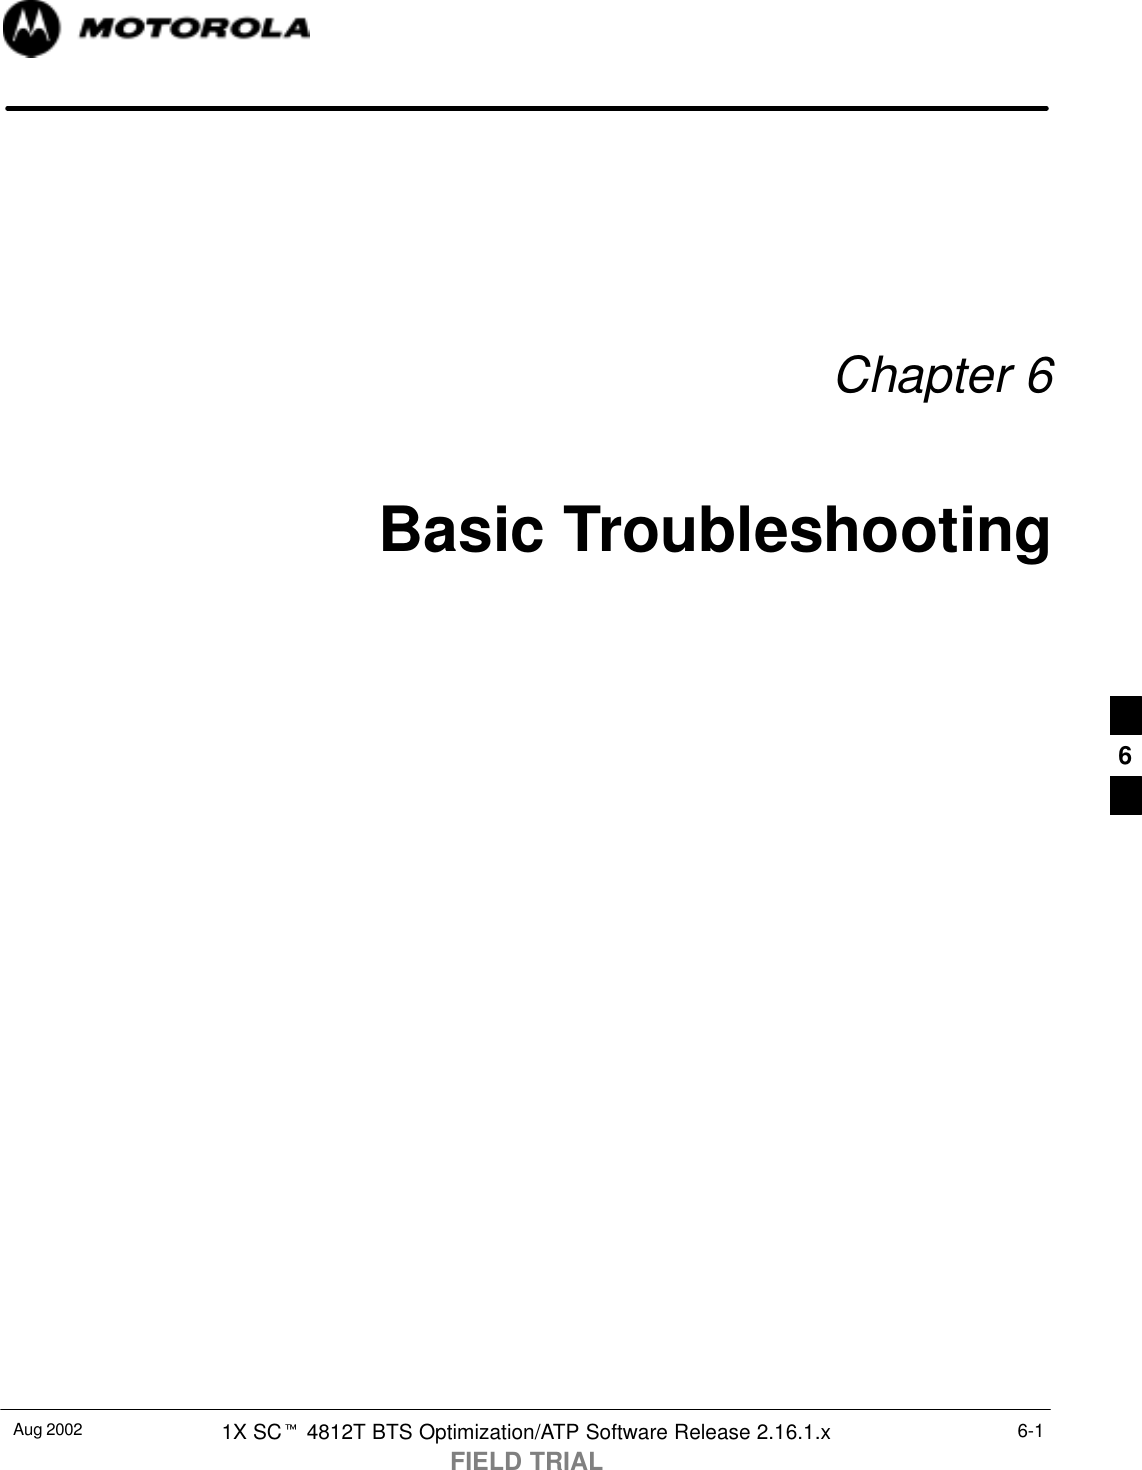 Aug 2002 1X SCt 4812T BTS Optimization/ATP Software Release 2.16.1.xFIELD TRIAL6-1Chapter 6Basic Troubleshooting6